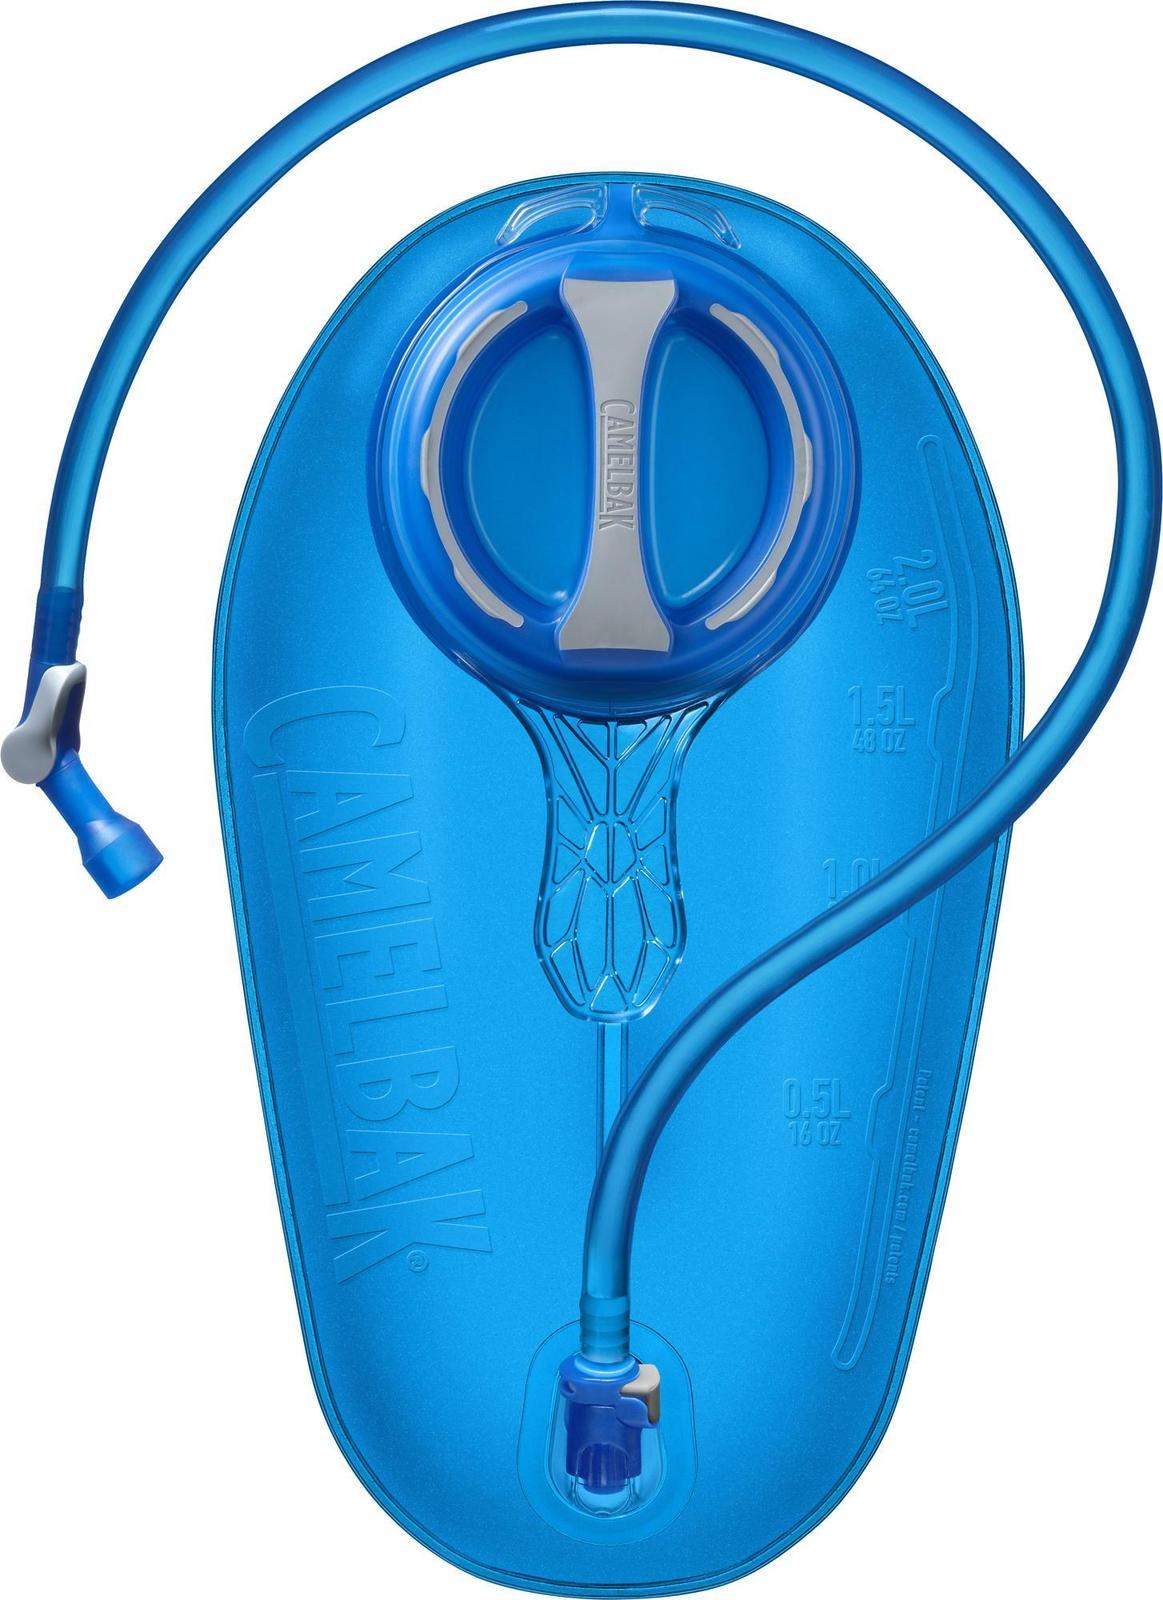 Crux 2l Reservoir Blue Camelbak -  - Mansfield Hunting & Fishing - Products to prepare for Corona Virus